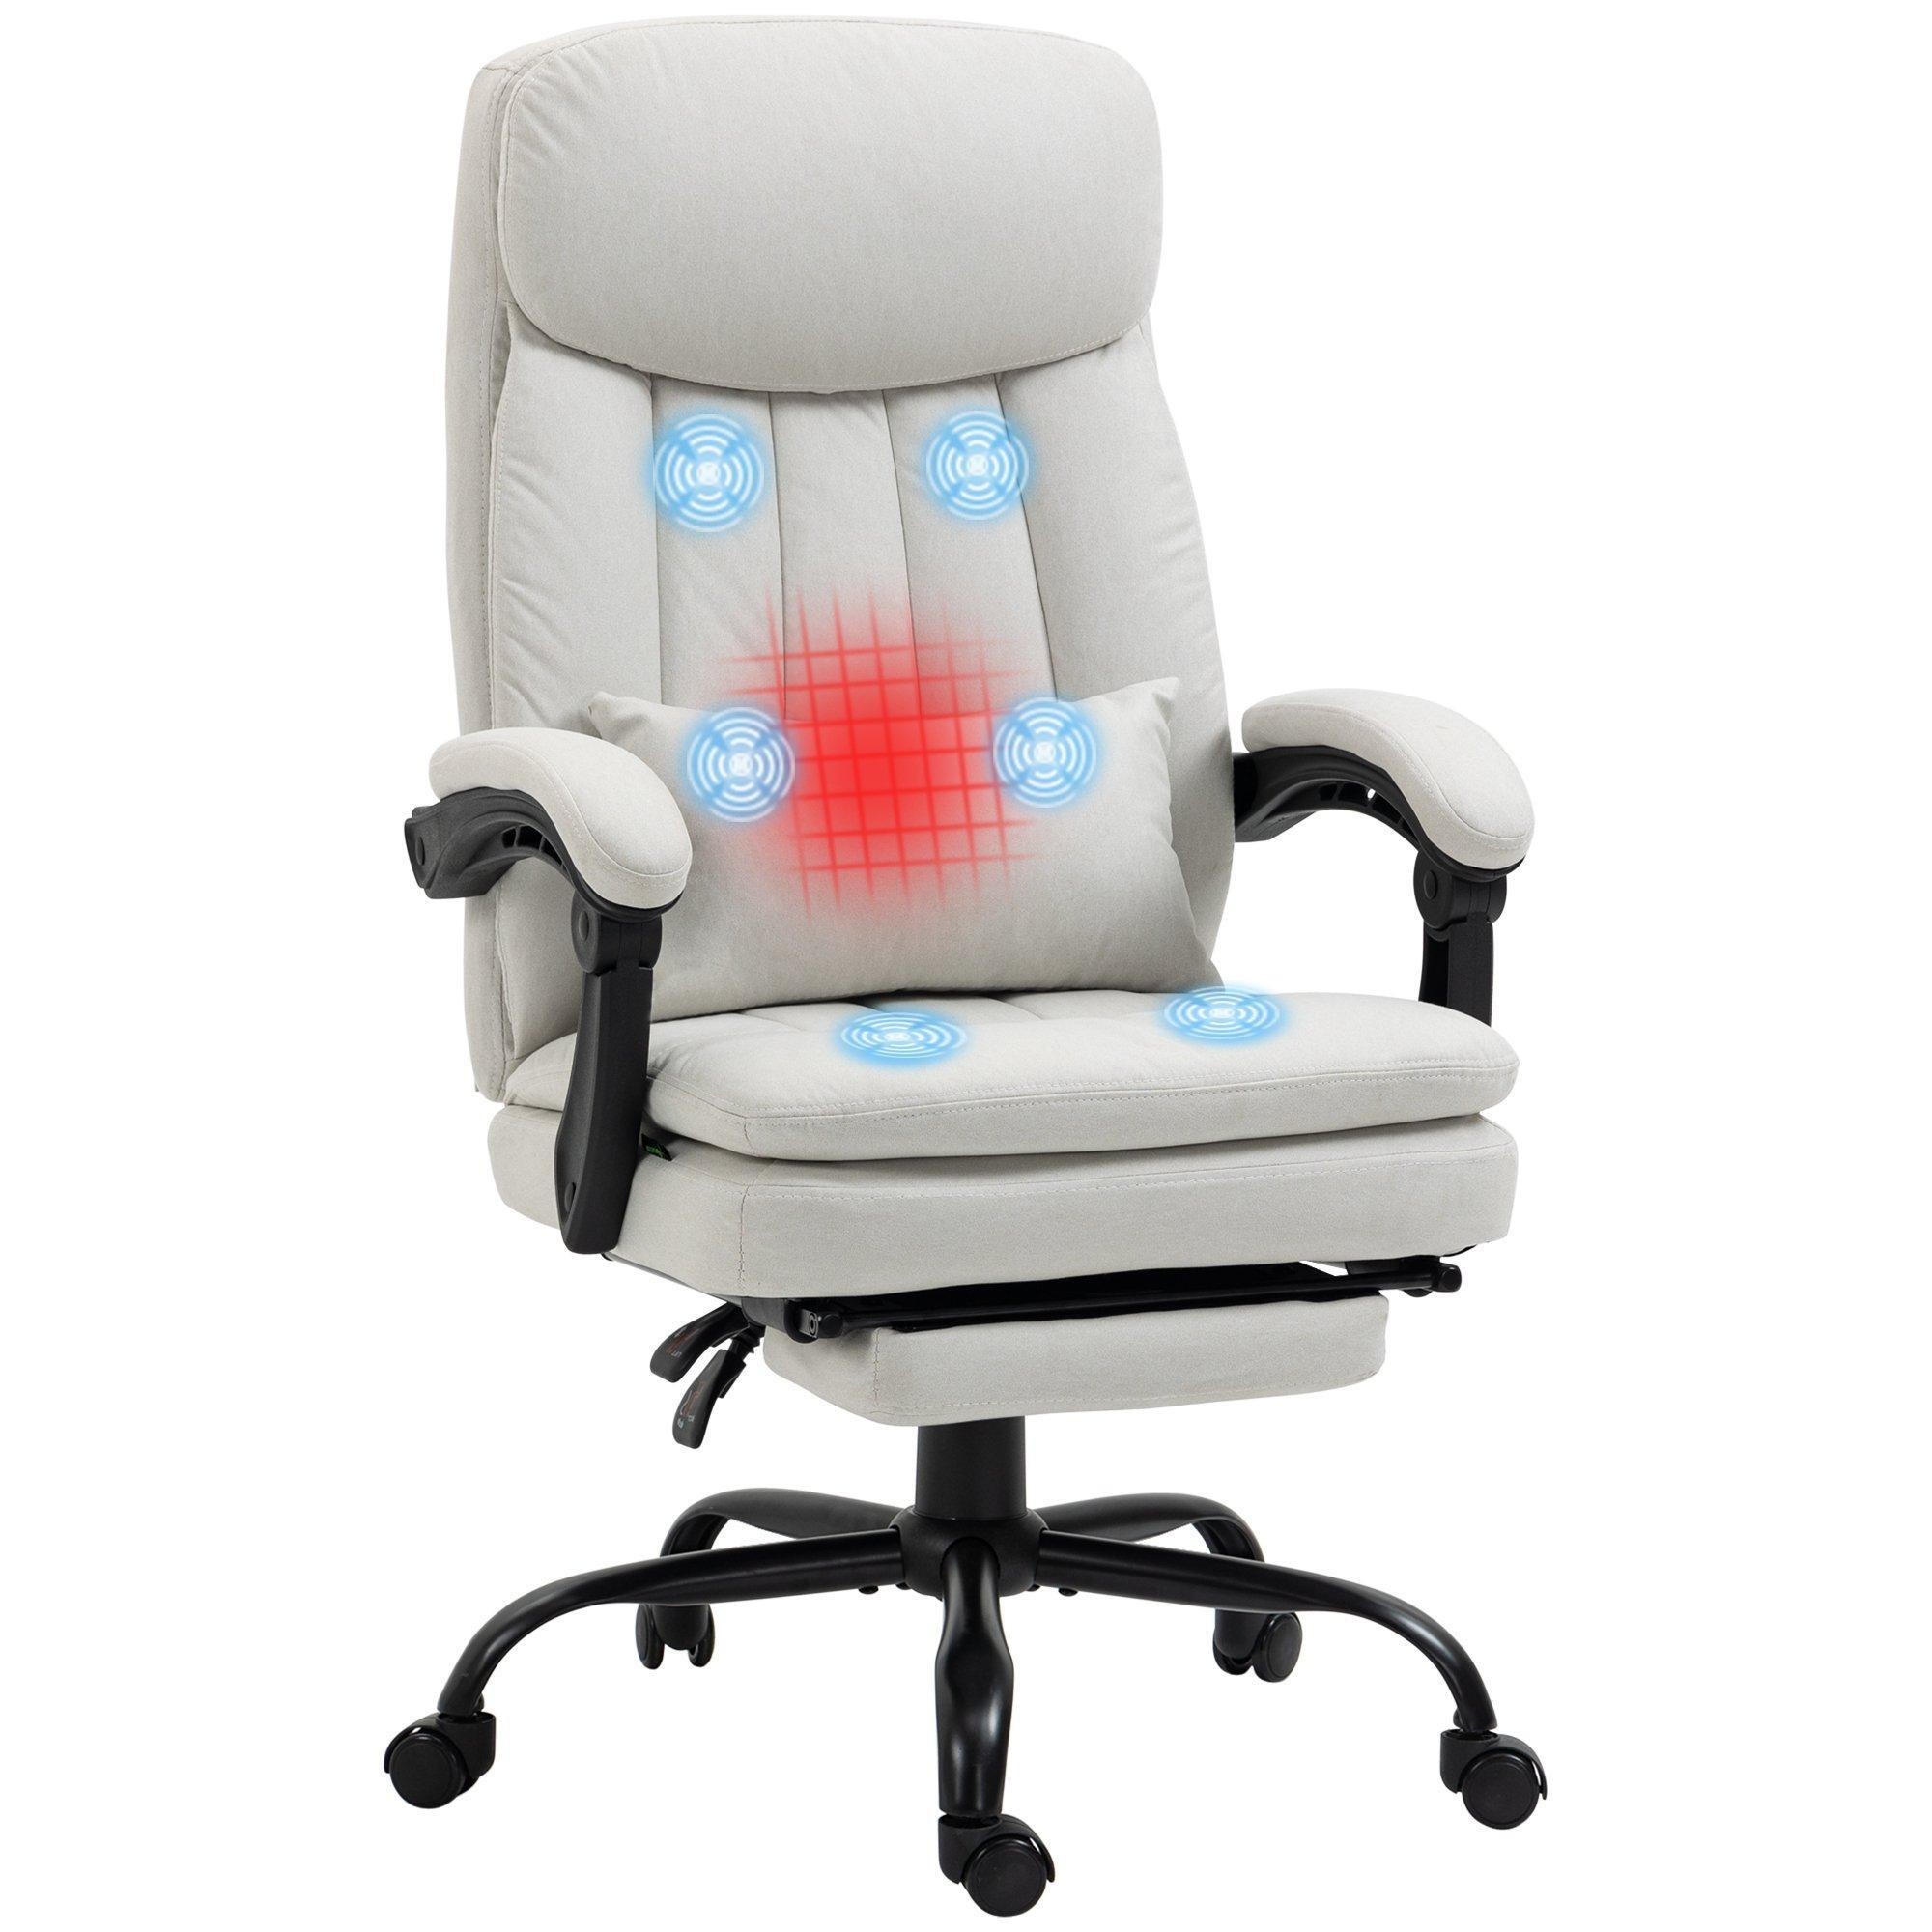 Microfibre Office Chair with Vibration Massage and Heat Lumbar Pillow - image 1